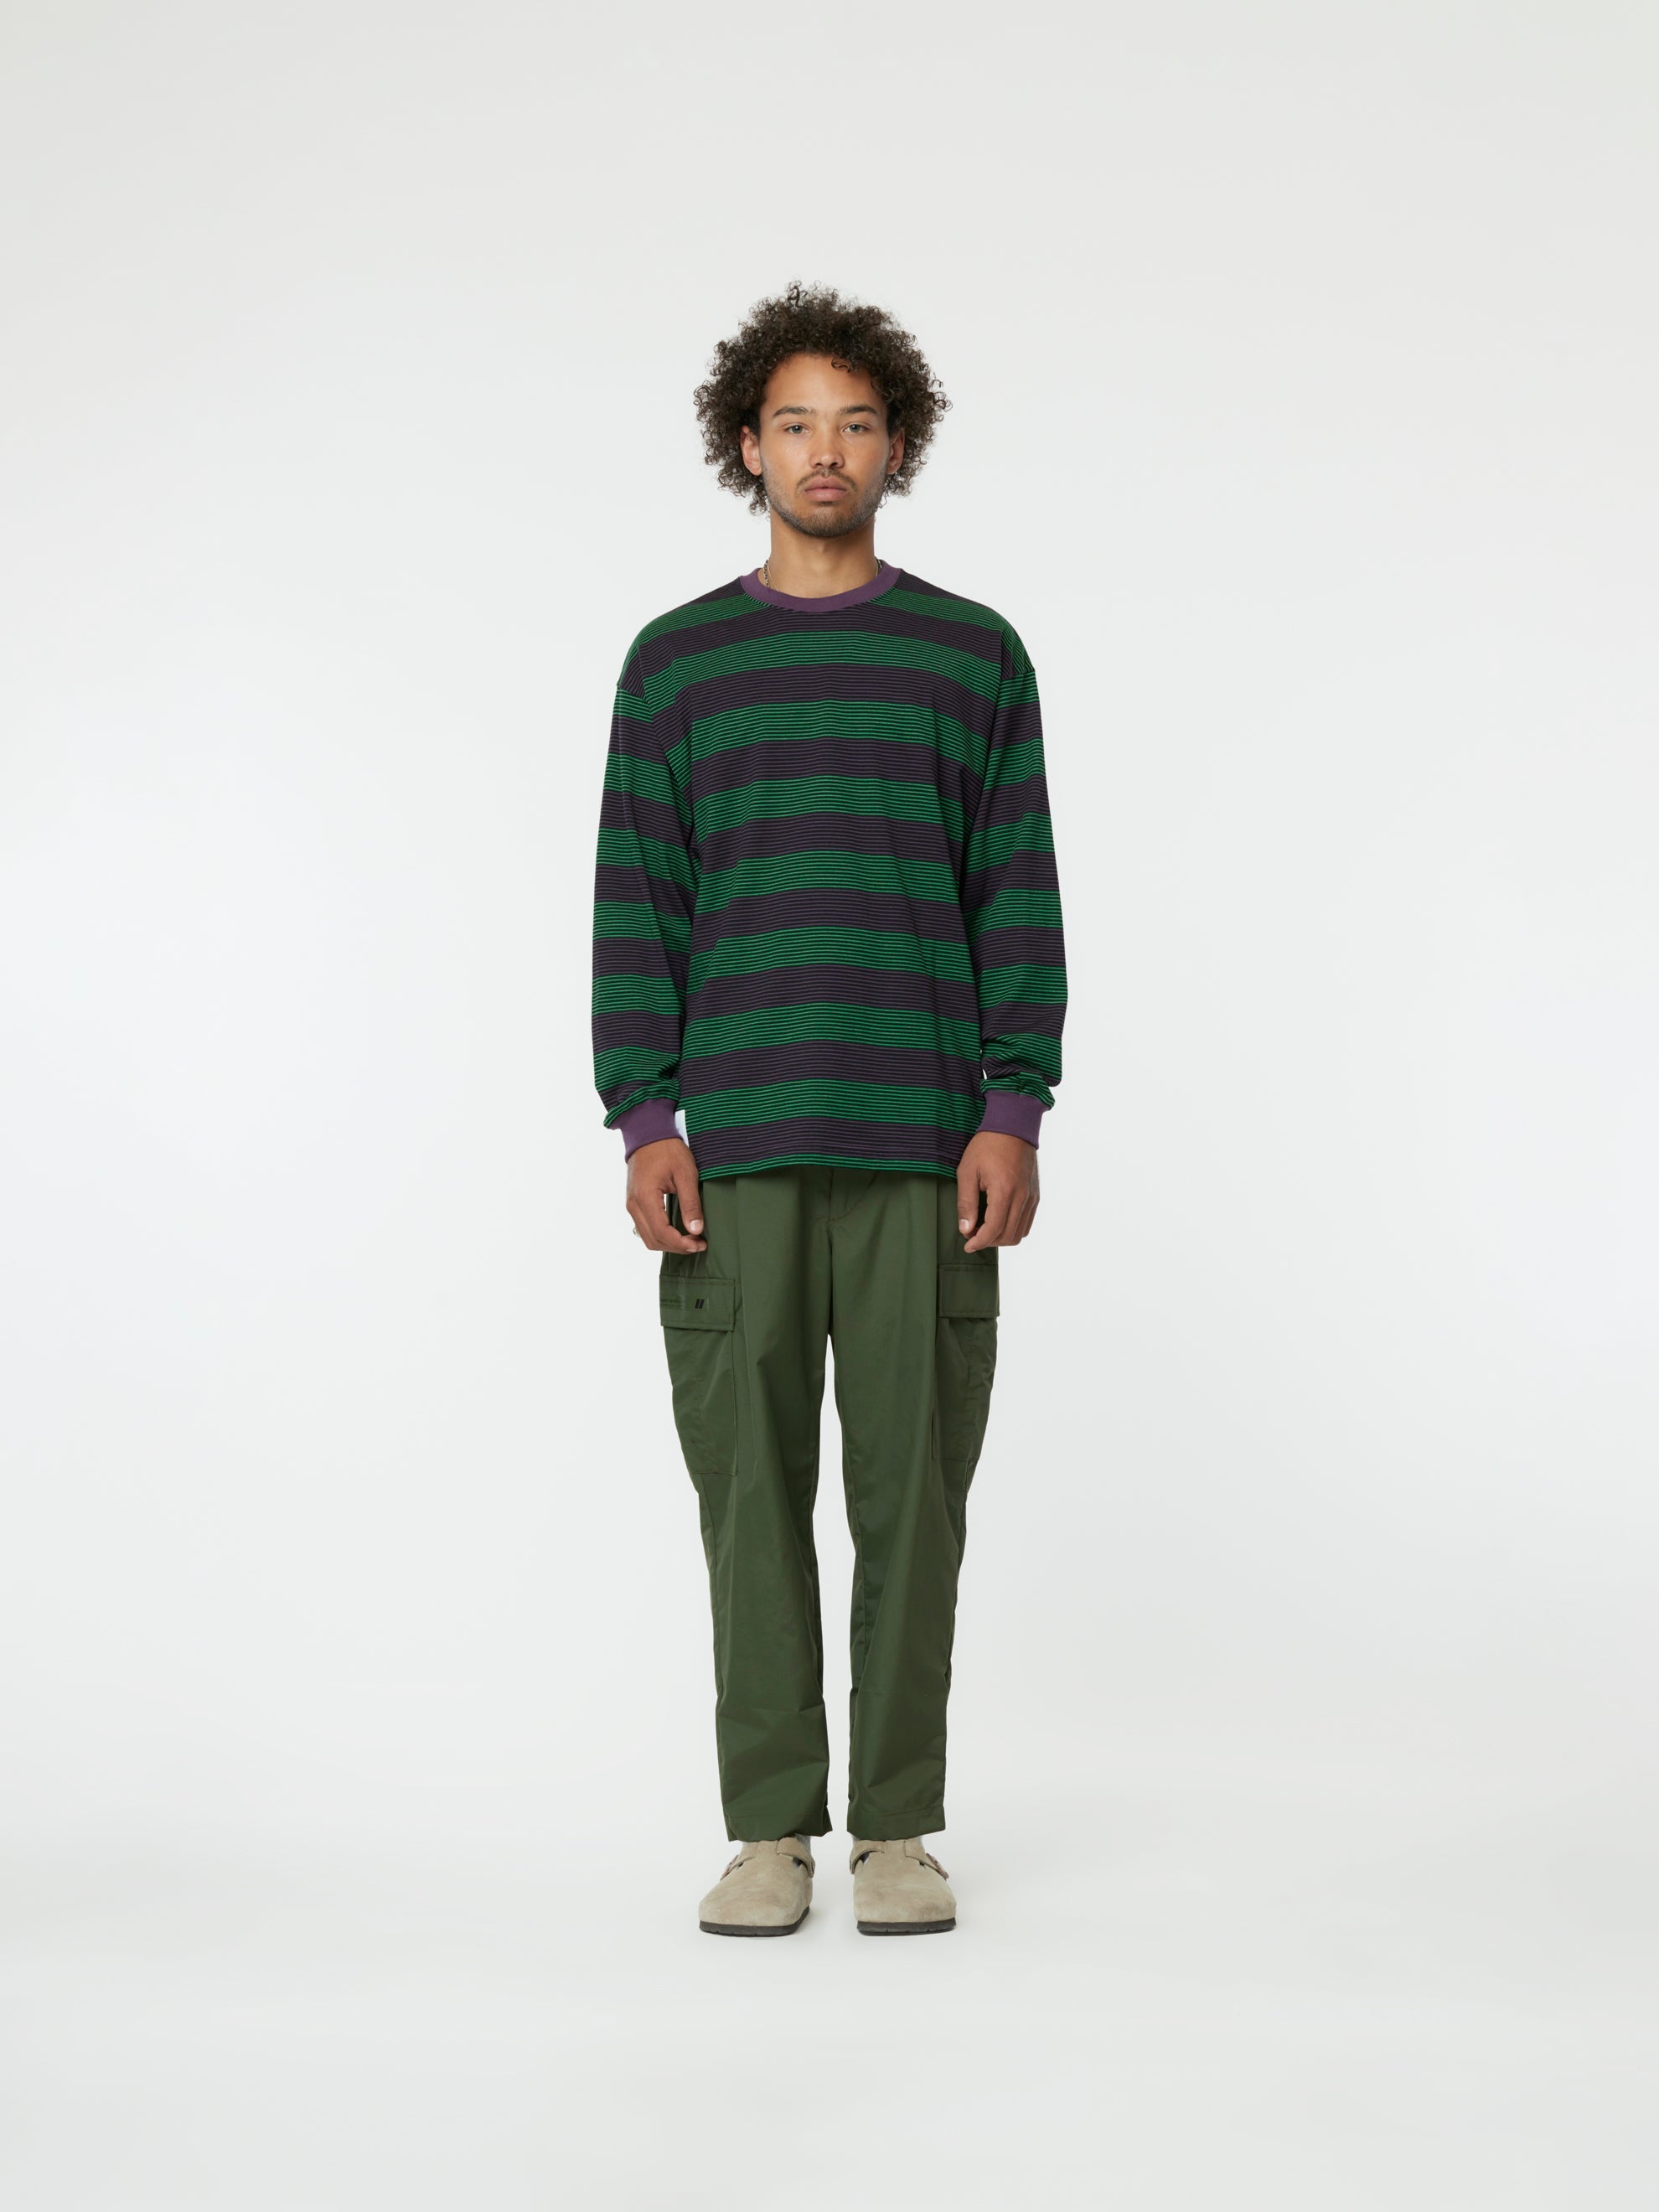 Buy Wtaps BDY 01 / LS / COTTON. (GREEN) Online at UNION LOS ANGELES